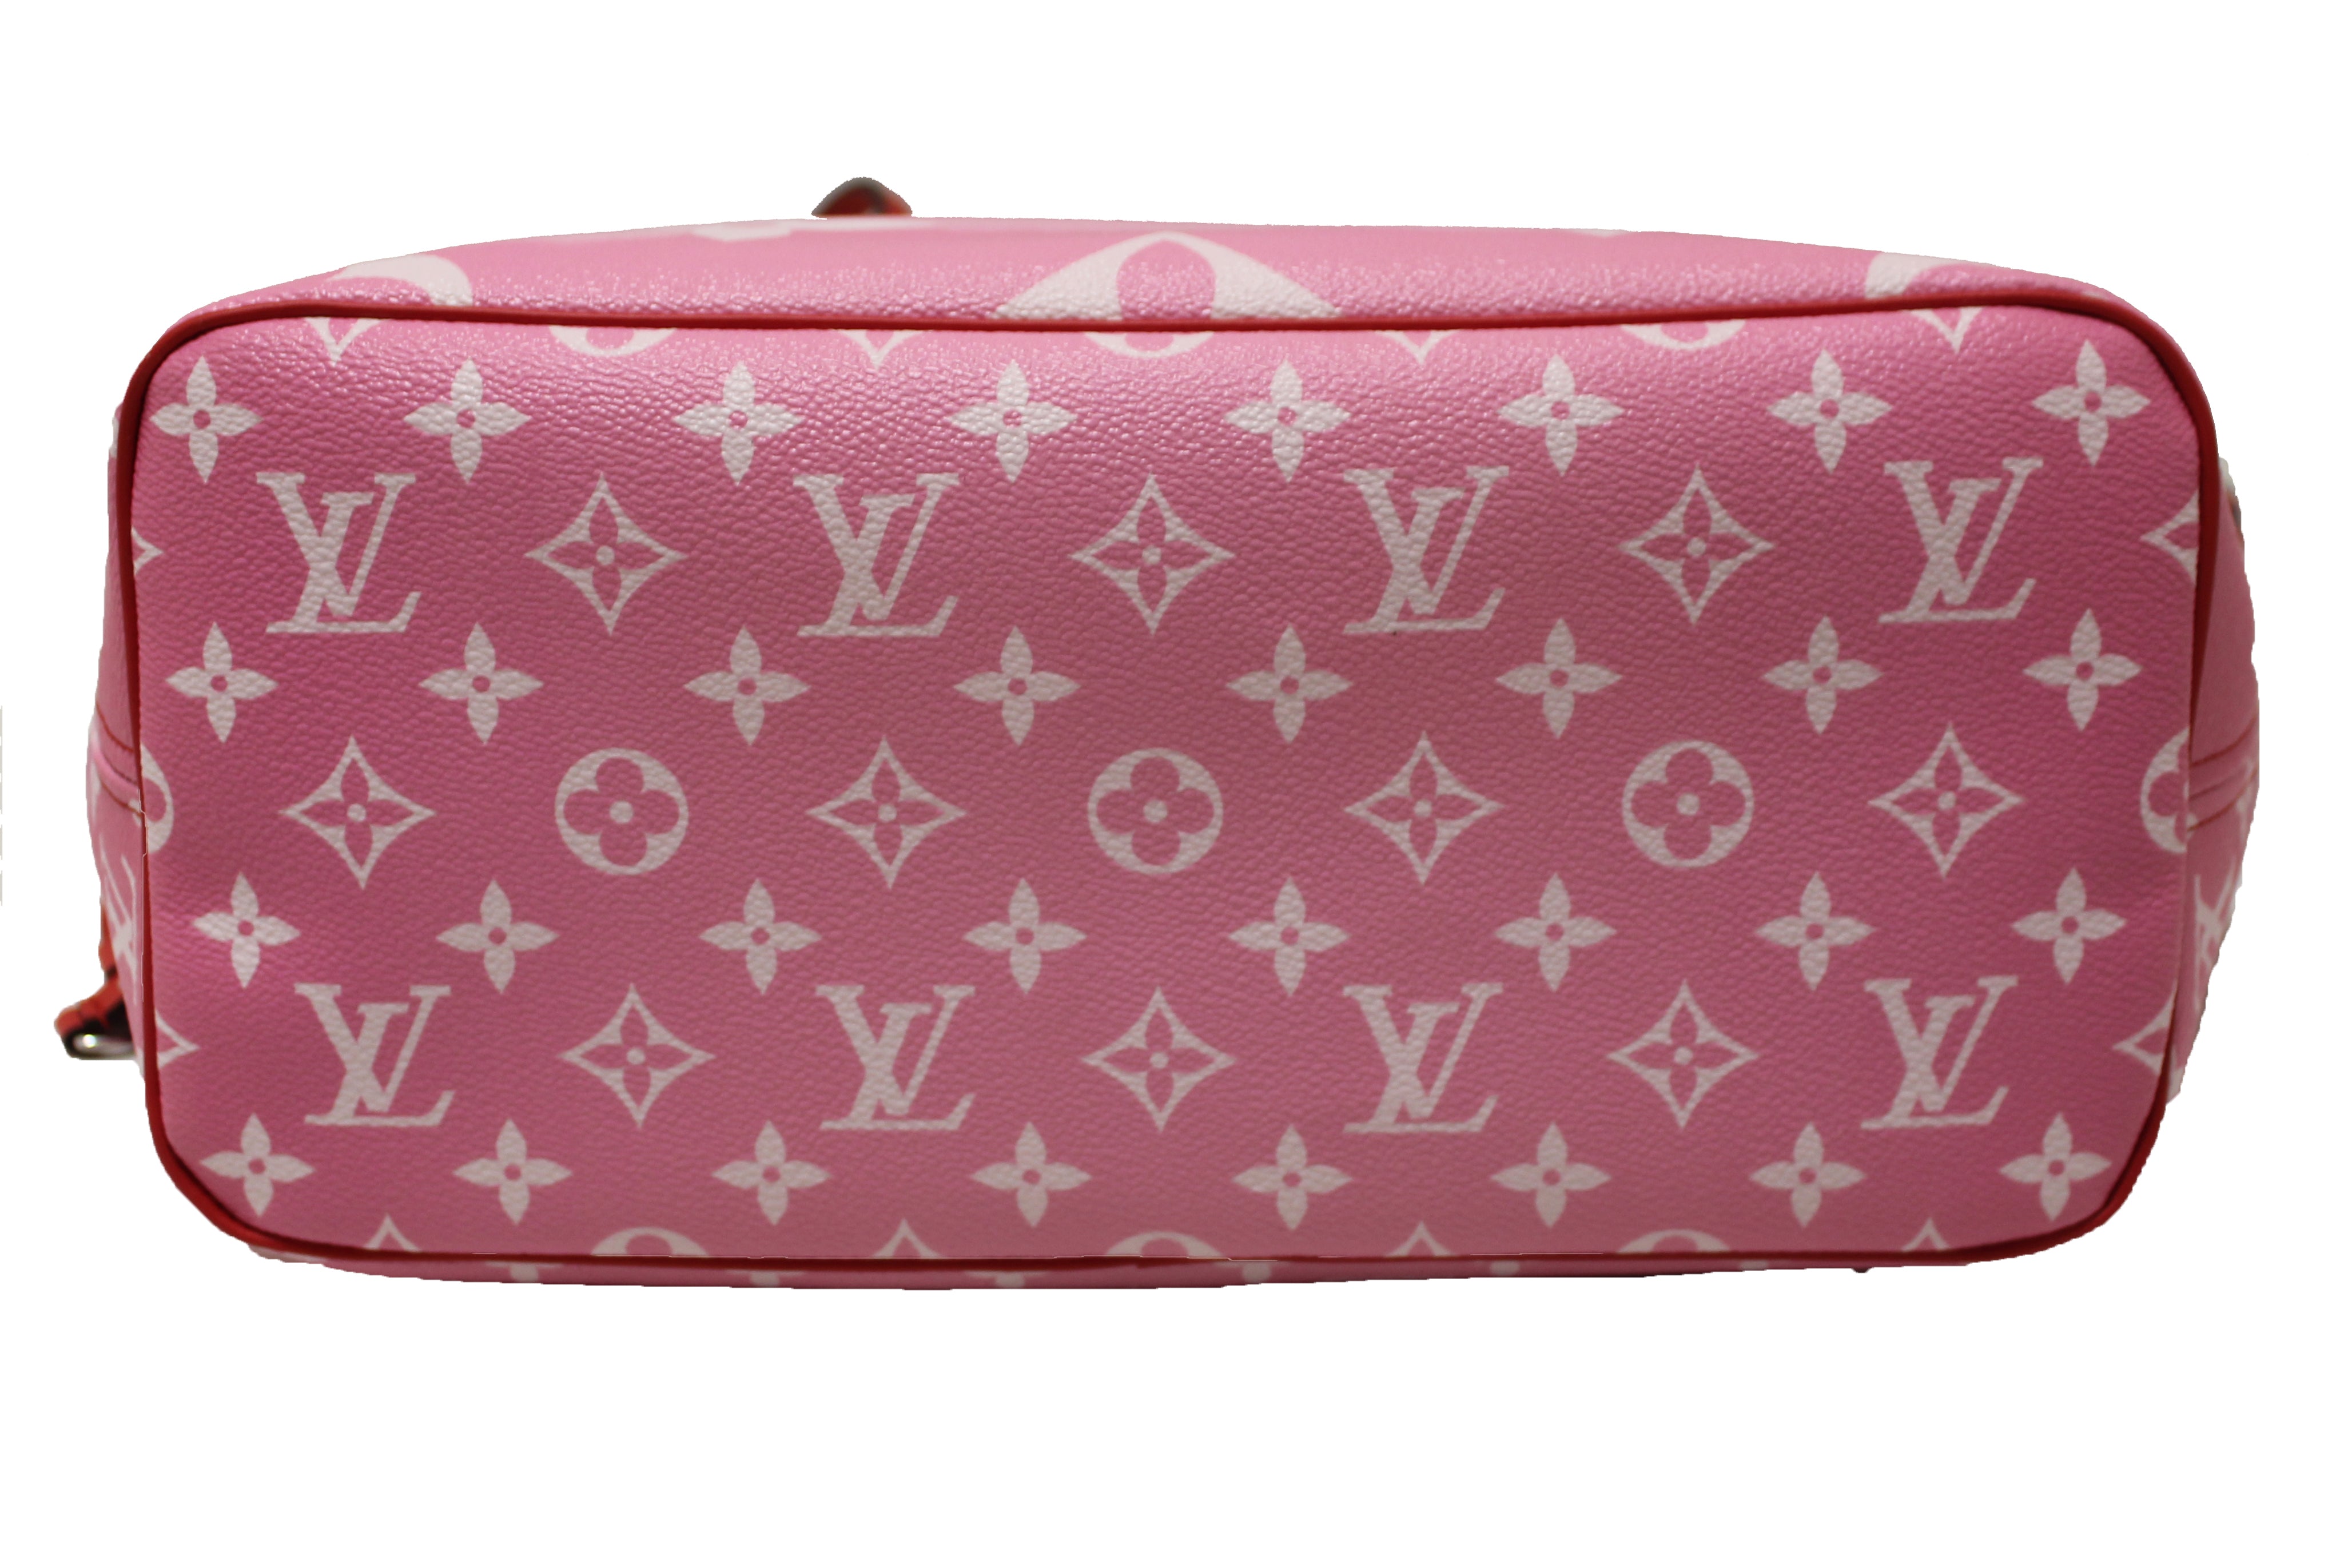 Authentic NEW Louis Vuitton Pink/Red Escale Giant Monogram Neverfull MM Shoulder Bag